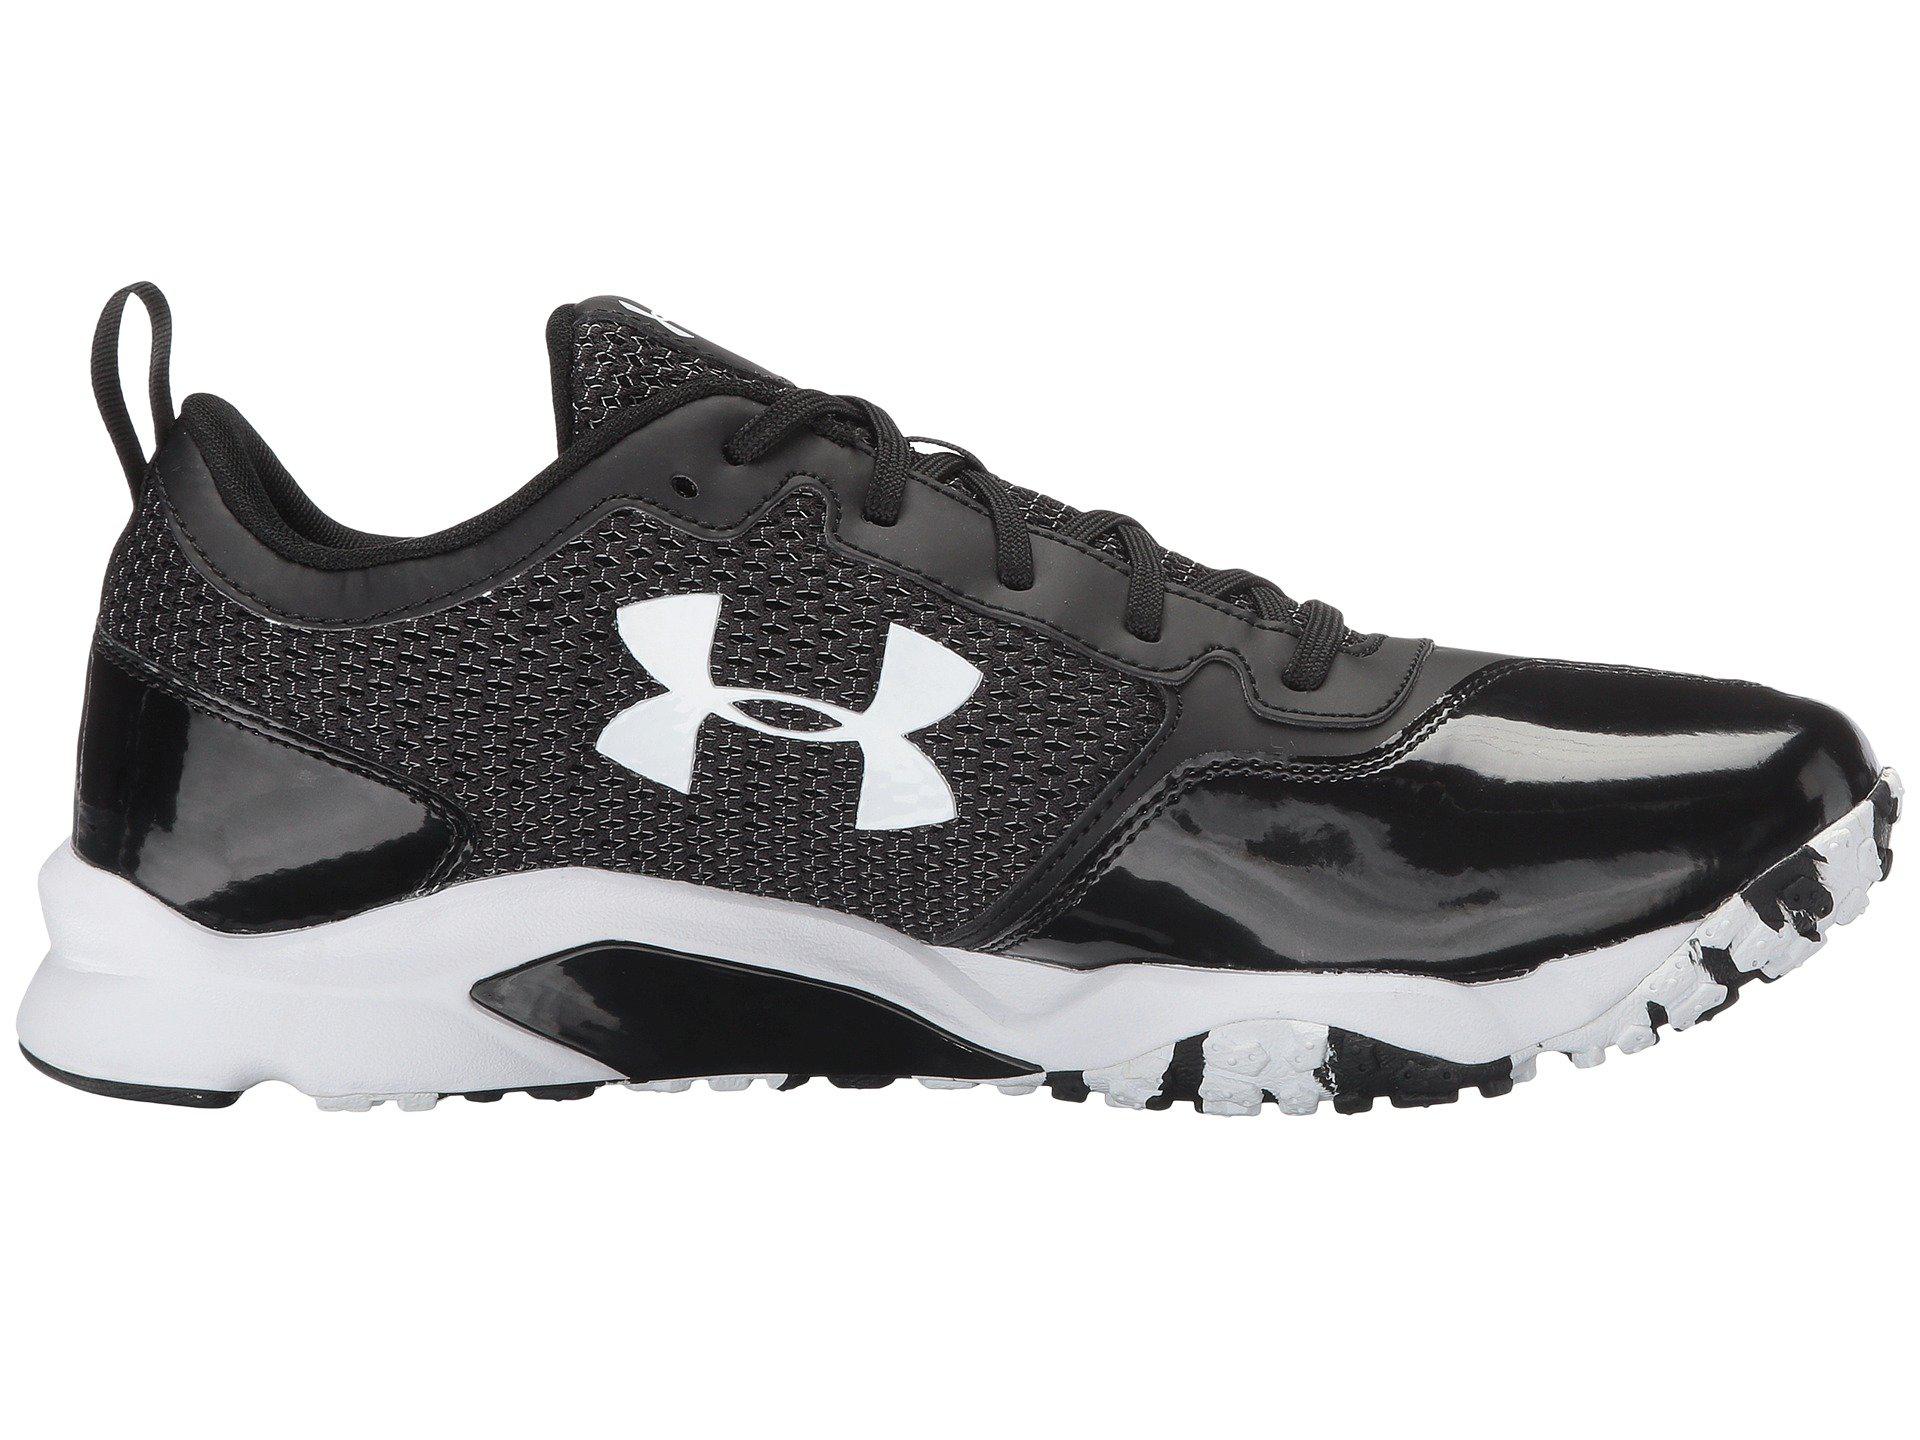 Under Armour Synthetic Ultimate Turf Trainer Baseball Shoe in Black/Black  (Black) for Men - Lyst